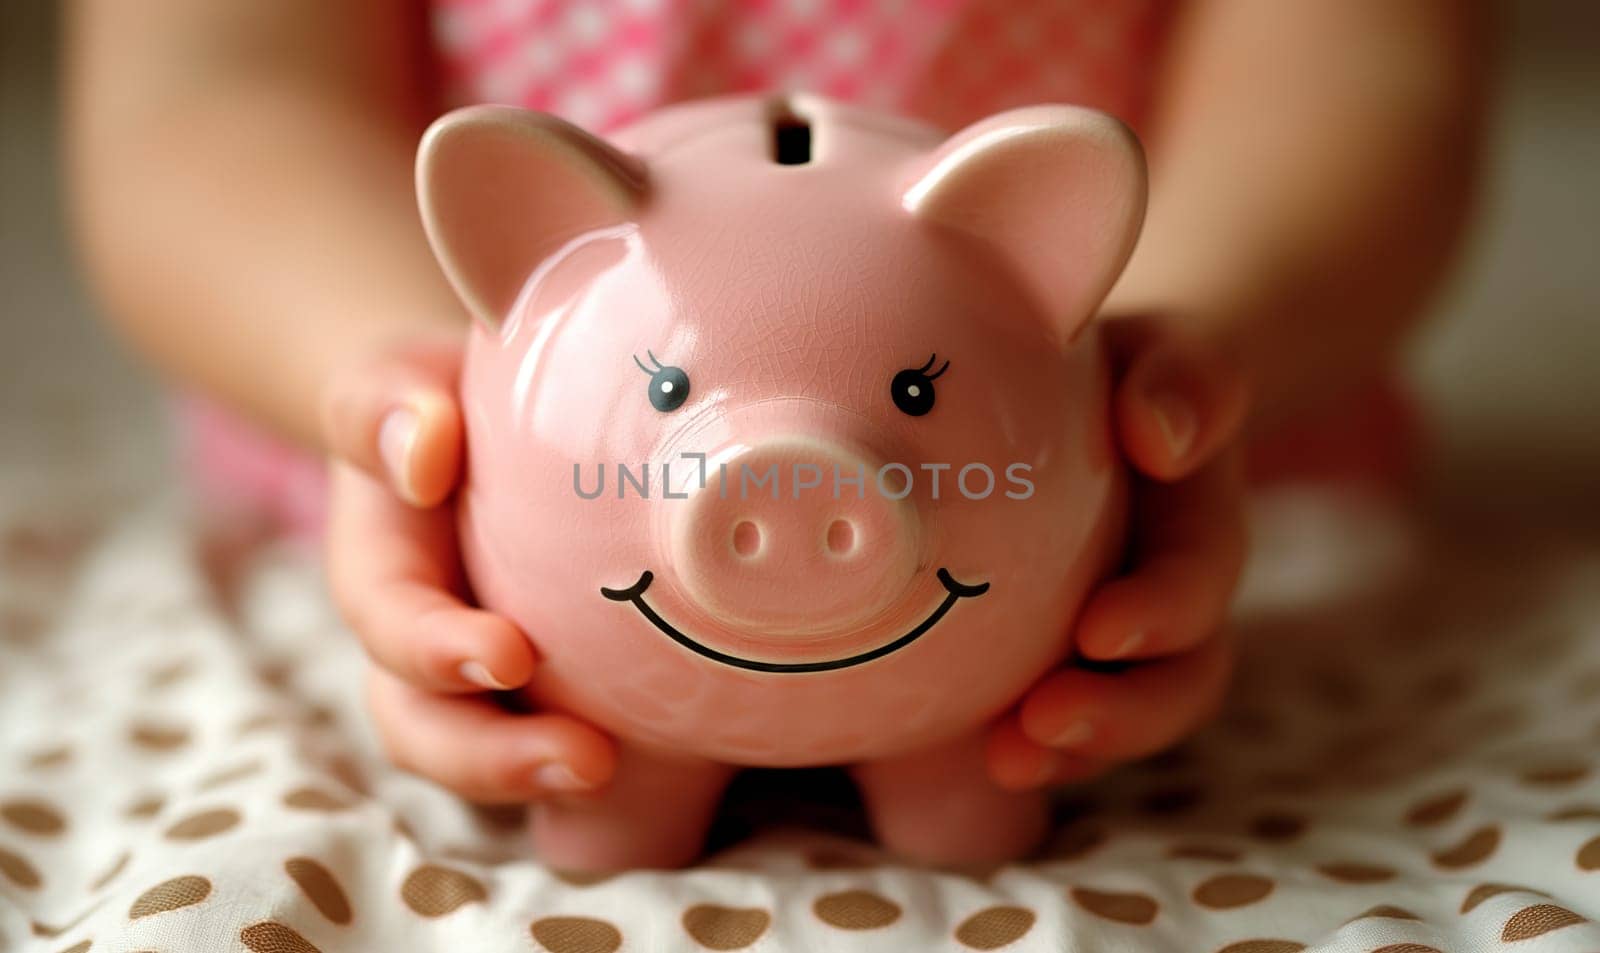 Young child holding a piggy bank in pink color.